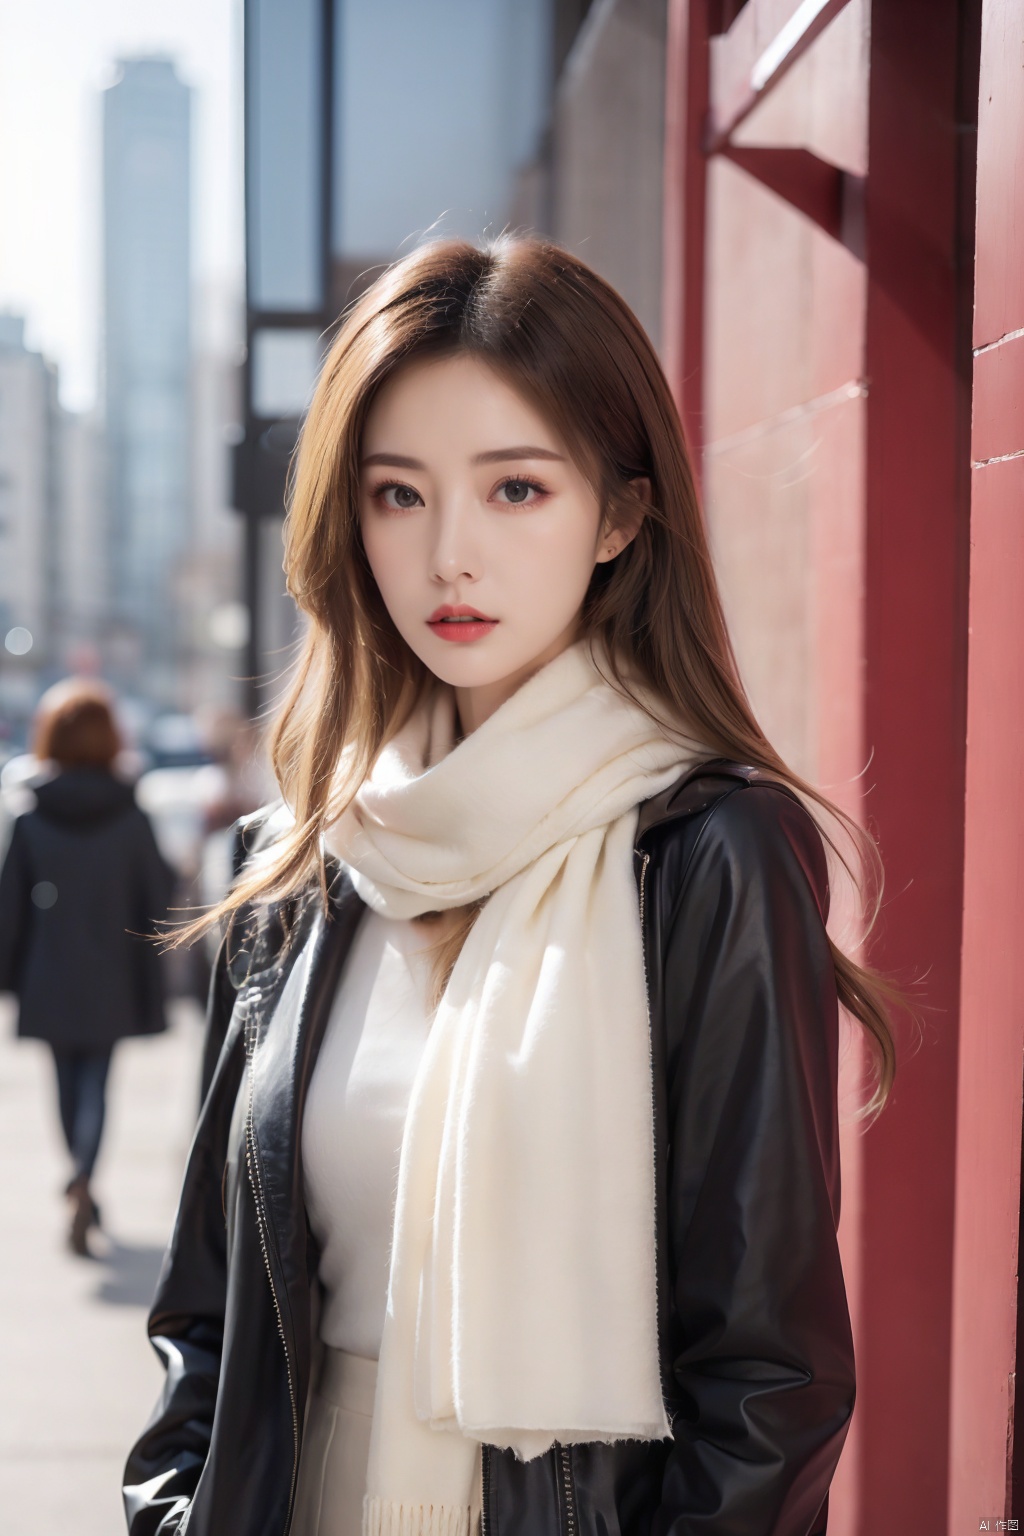  A woman wrapped in a cream-colored scarf, with a black coat draped over her shoulders. Her gaze is pensive, her blonde hair tousled by the wind, and her lips painted a bold red, against an urban backdrop., masterpiece,best quality,